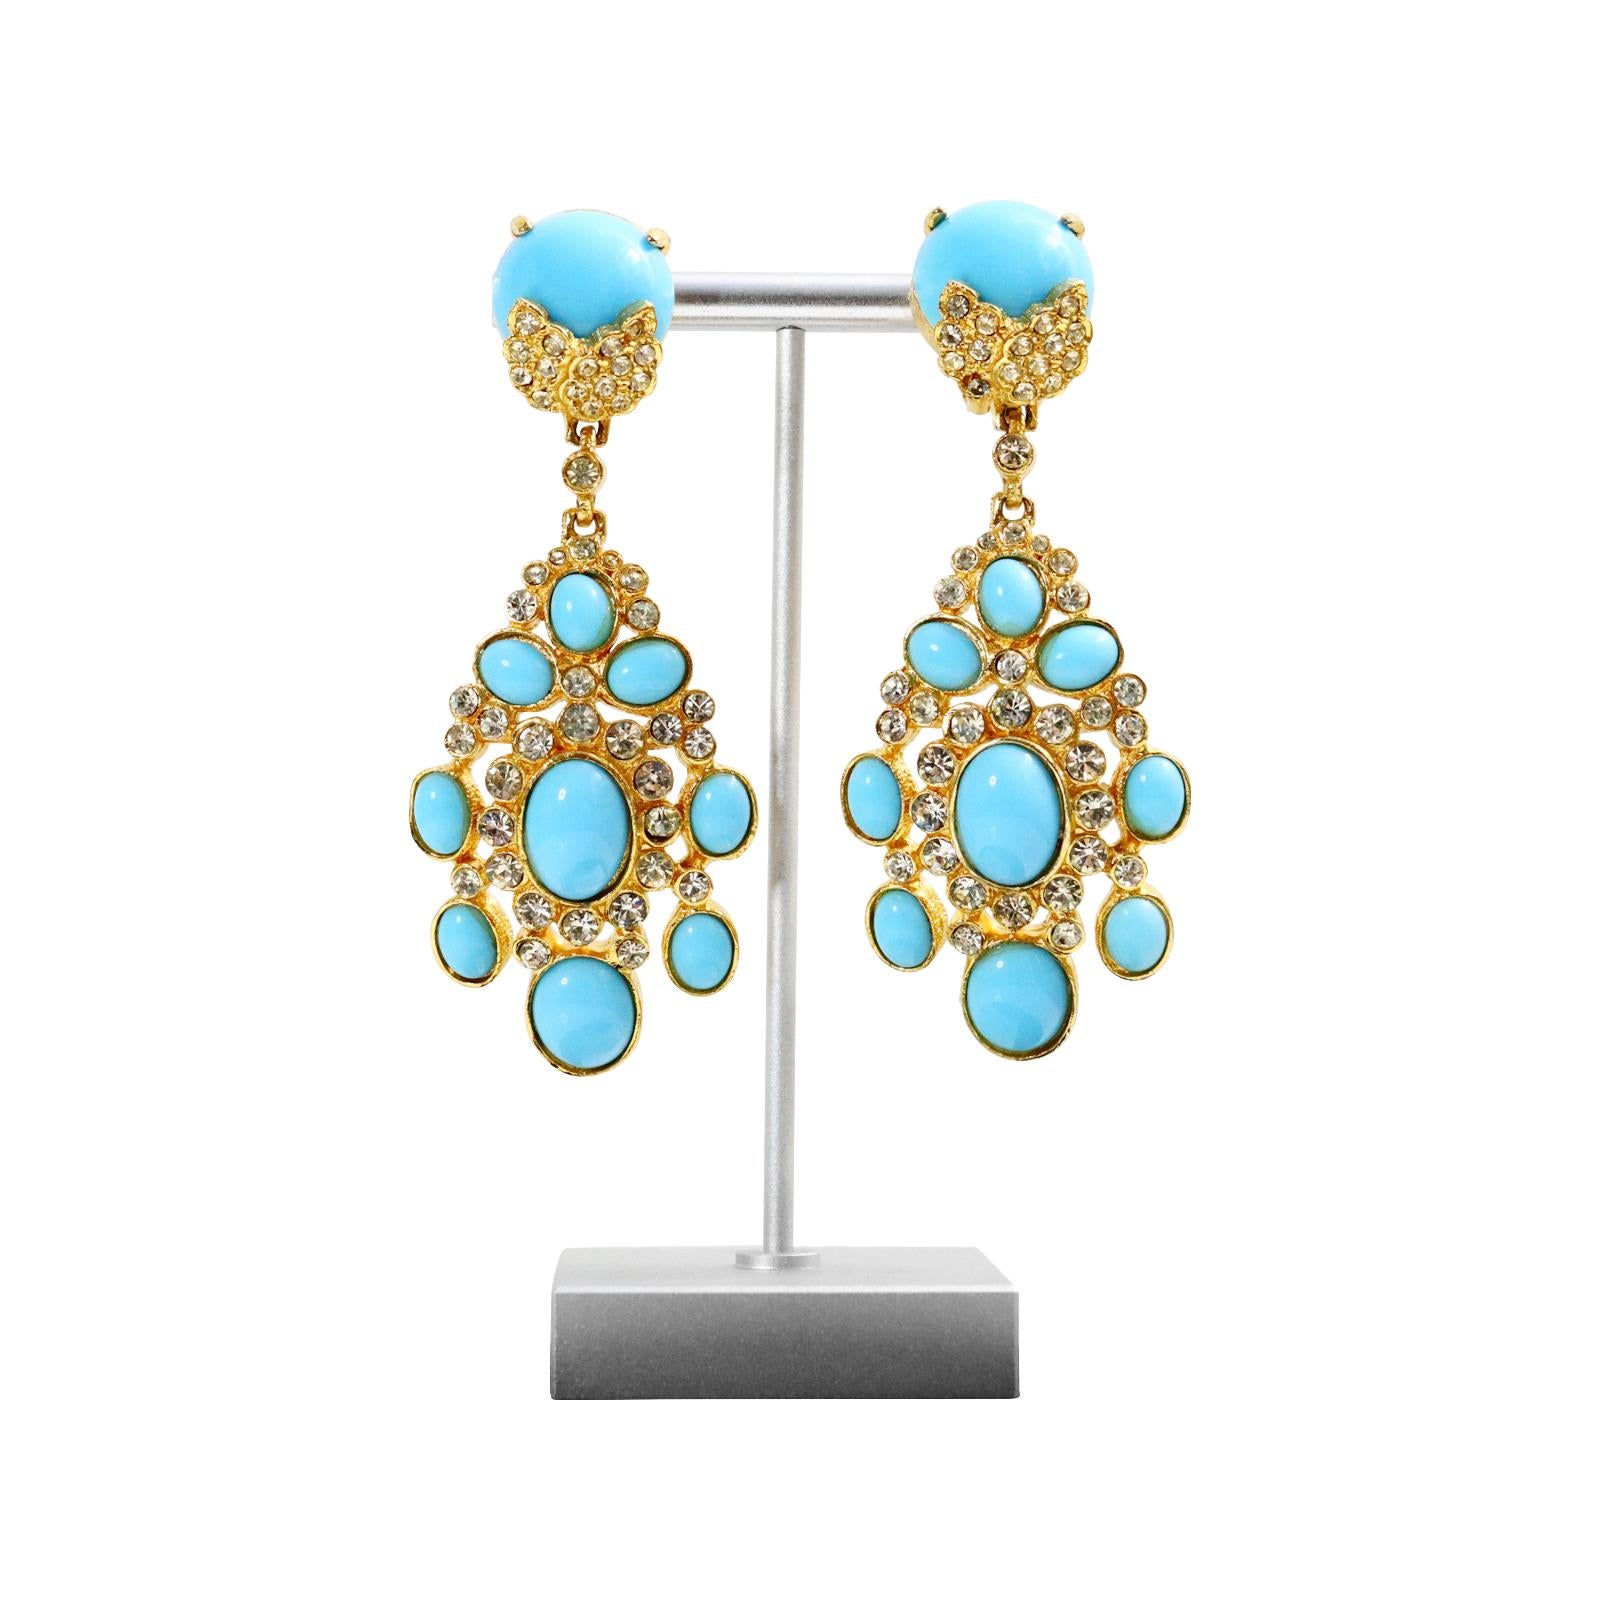 Vintage Cadoro Gold with Faux Turquoise Dangling Earrings Circa 1980s For Sale 2